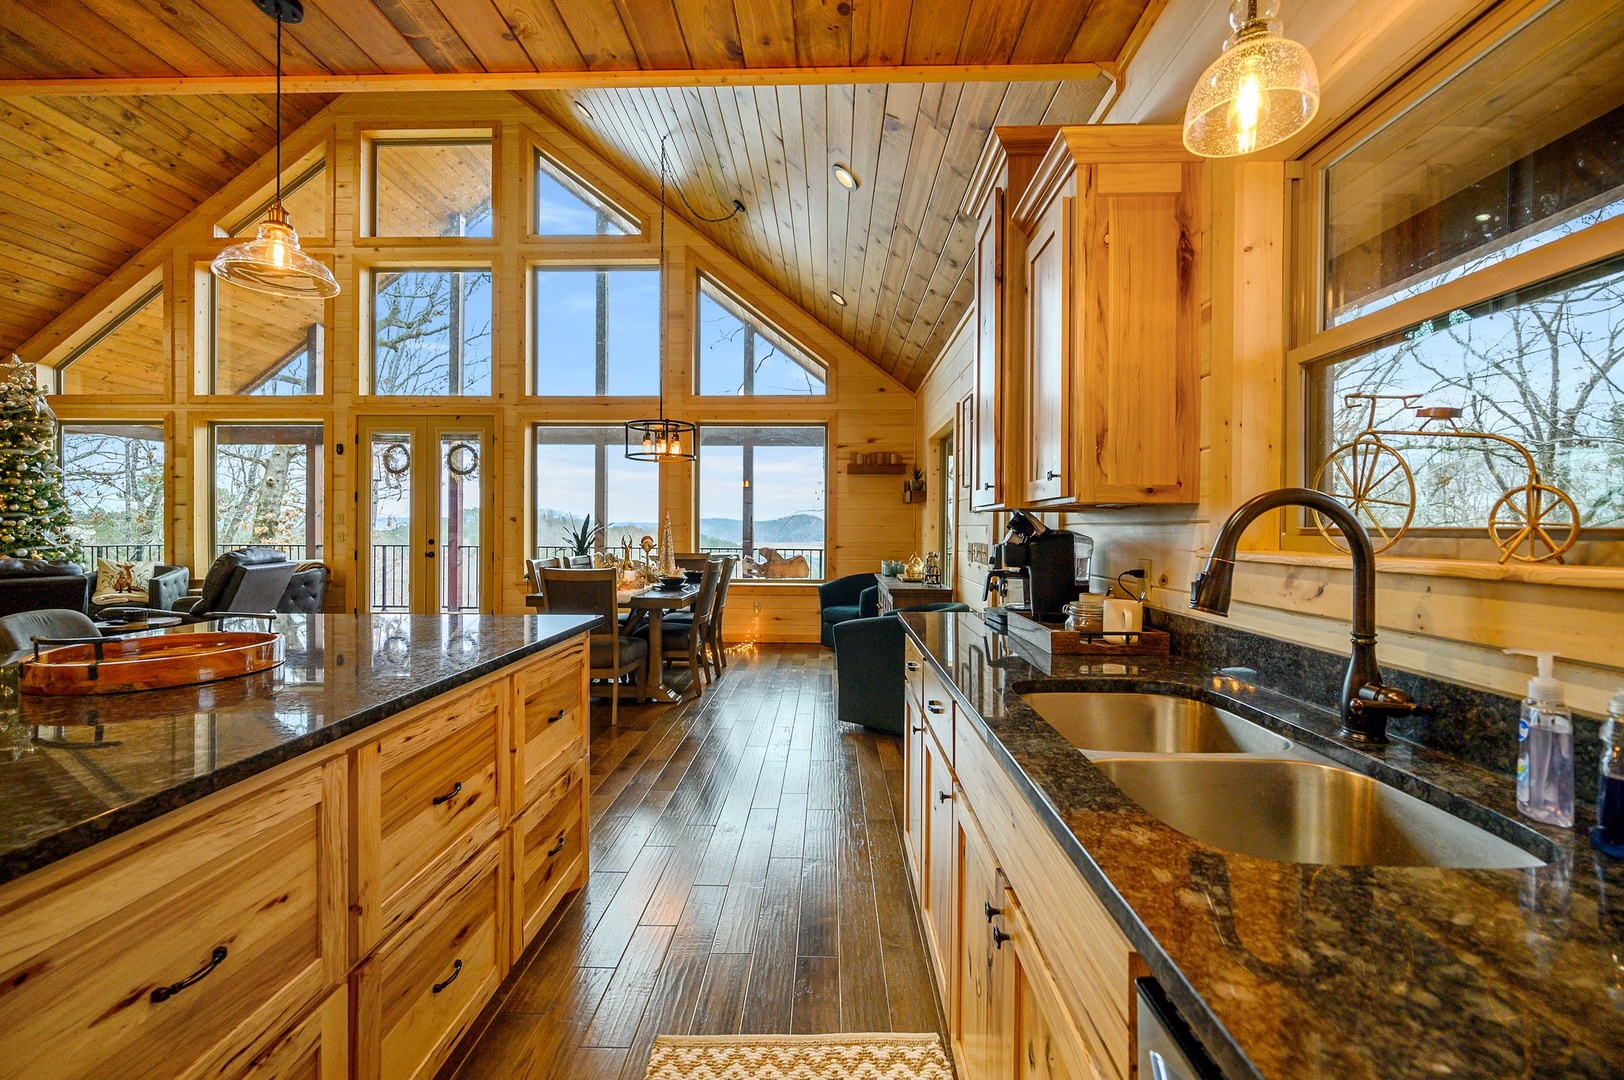 Mountain views can also be seen from the kitchen